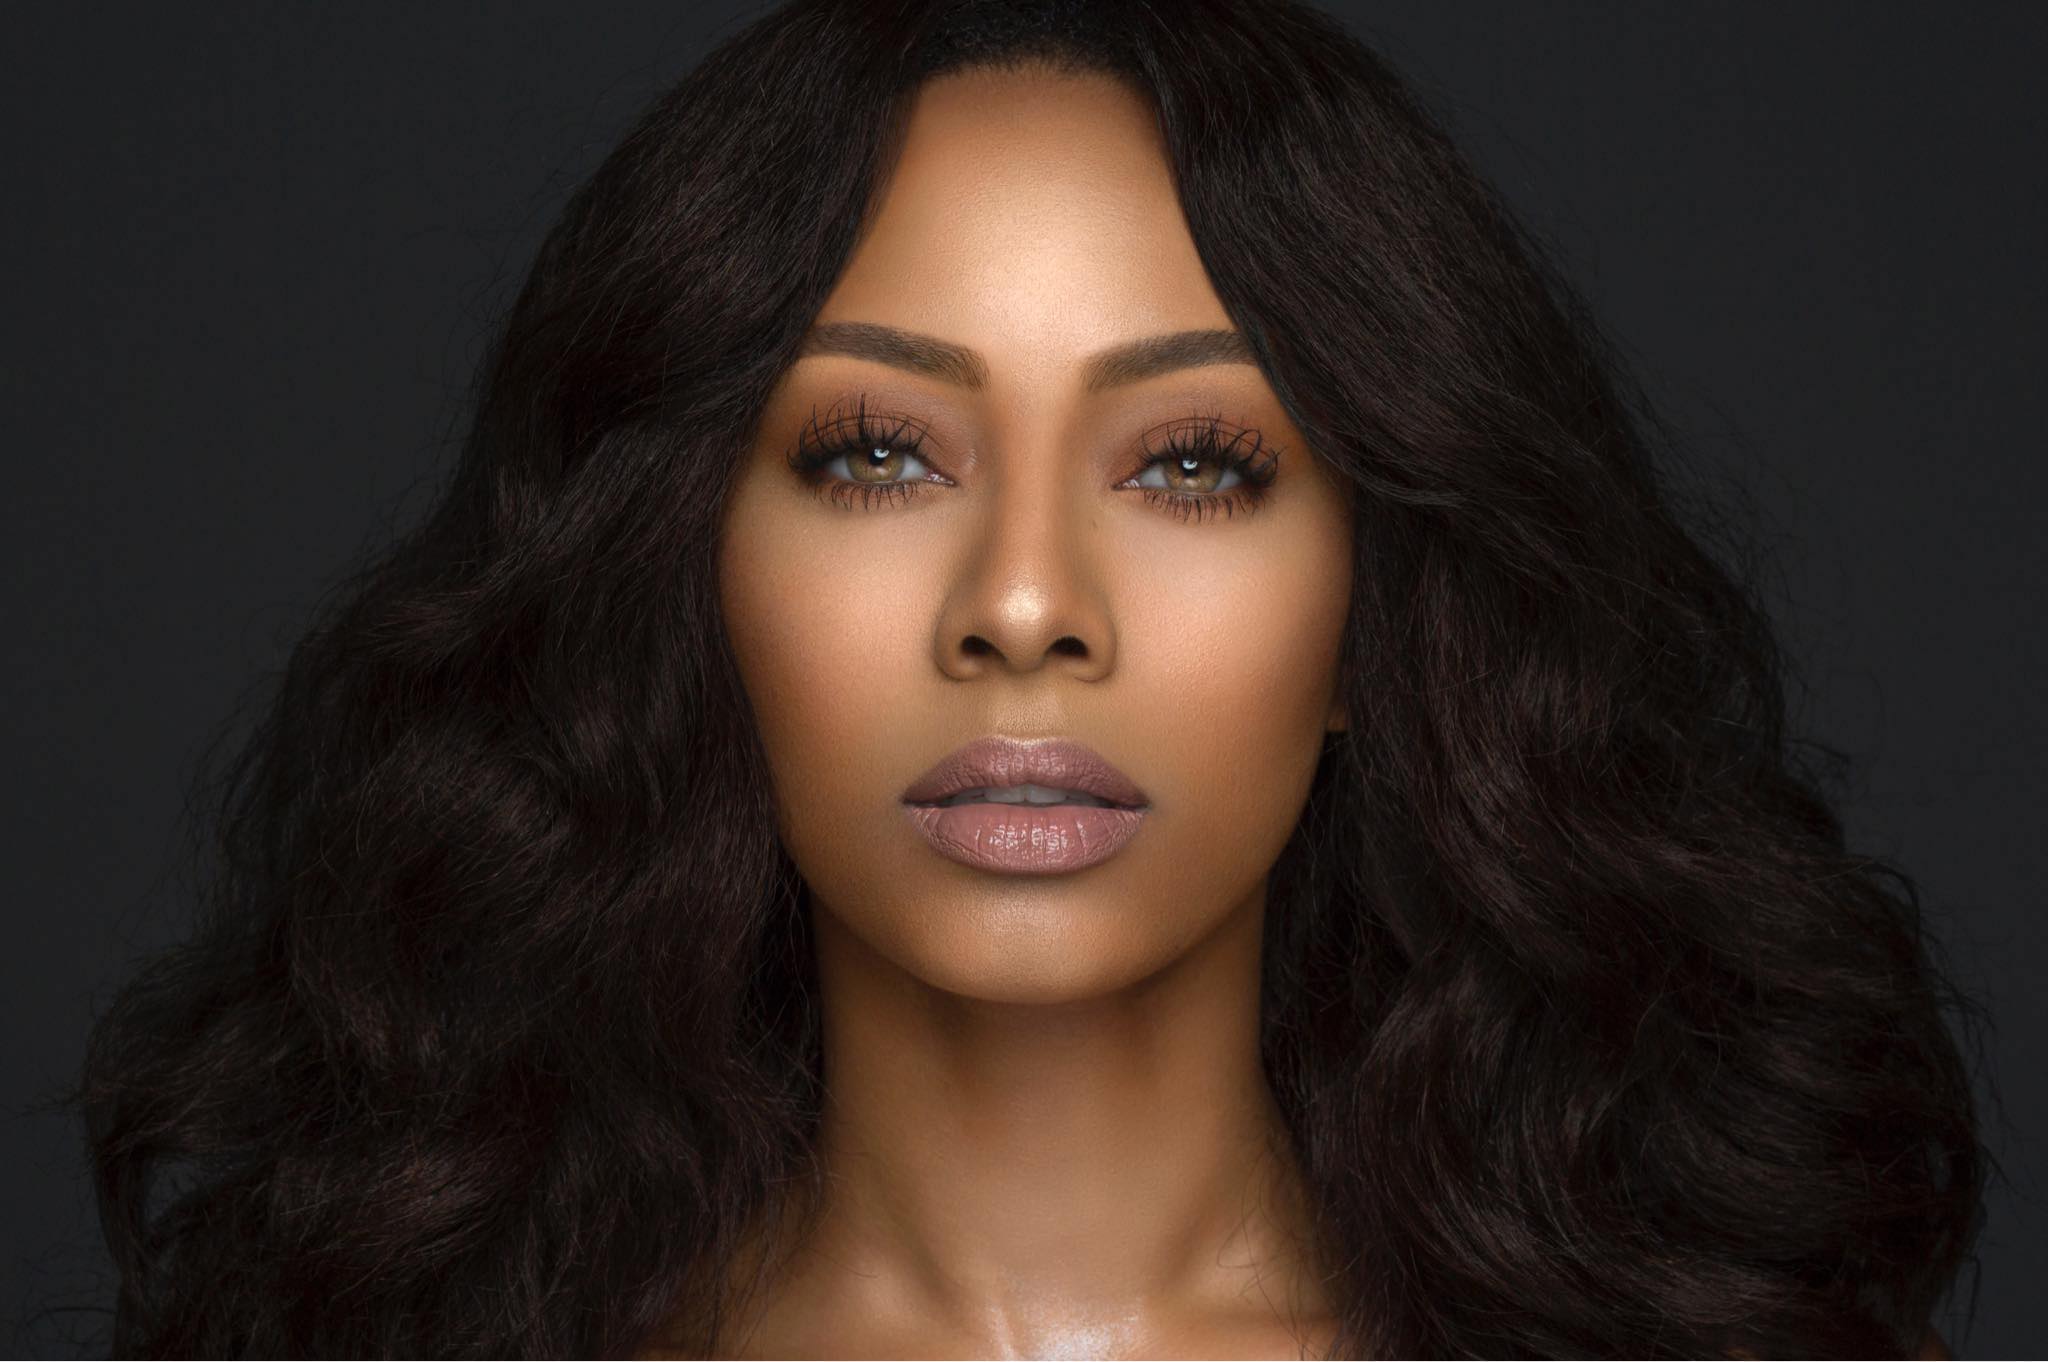 Keri Hilson Says She's Ready to Return to Music